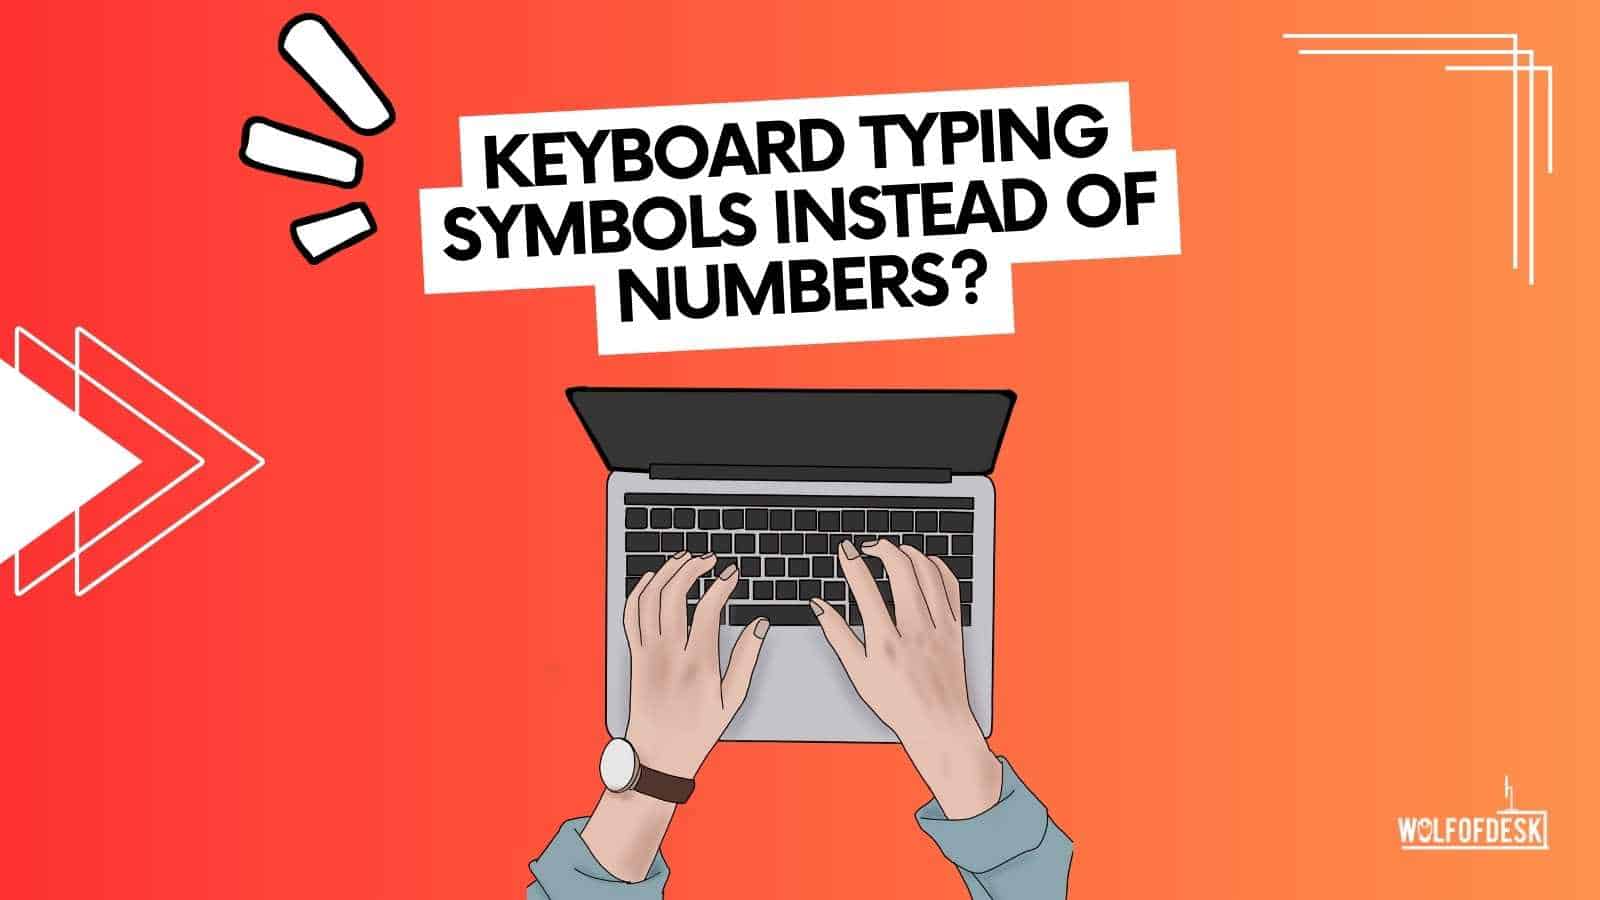 Keyboard Typing Symbols instead of Numbers - Quick Fix